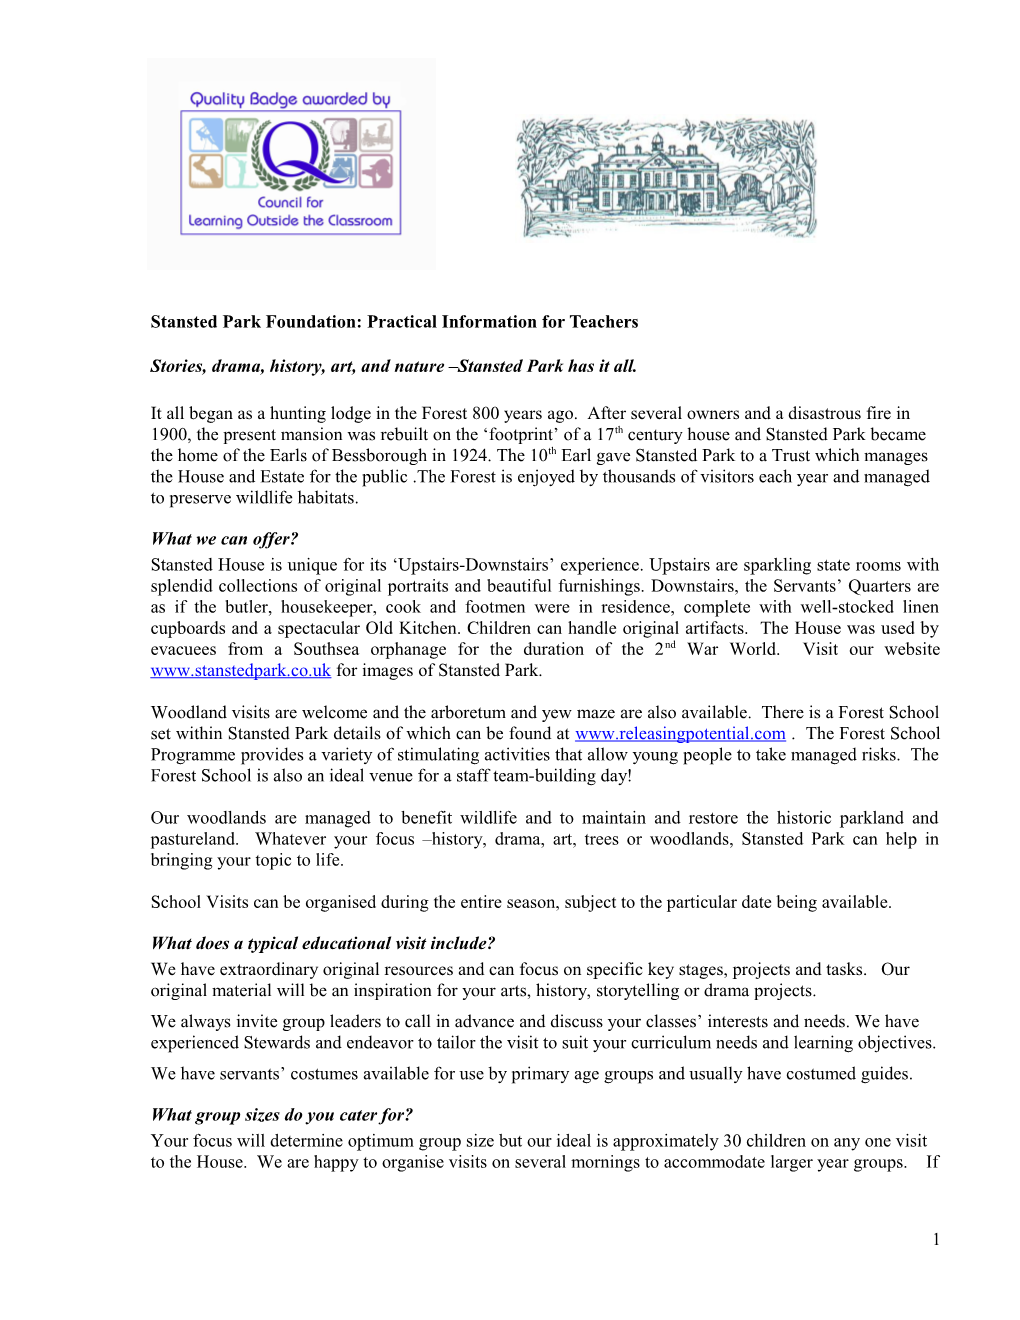 Stansted Parkfoundation:Practical Information for Teachers